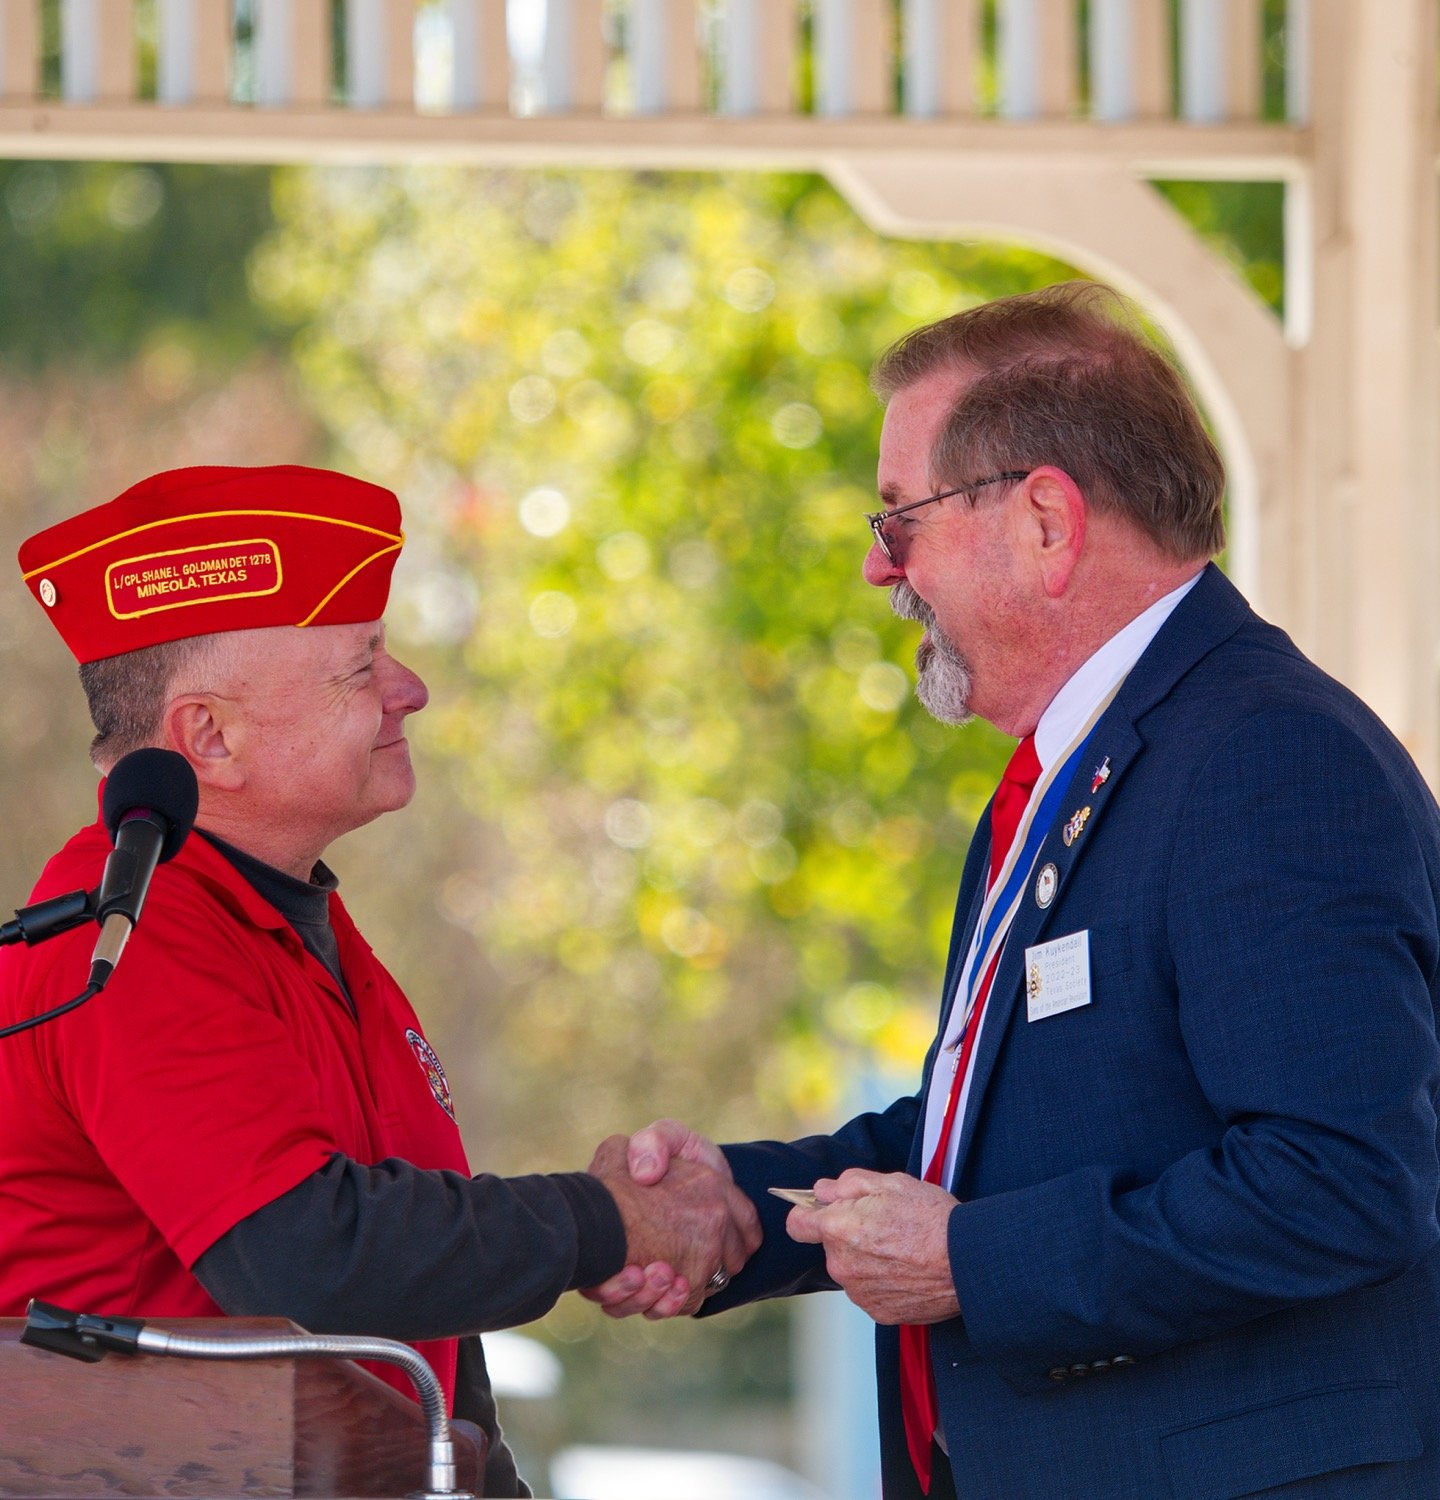 Wesley Marsh, emcee for the Marine Corp. League's ceremony for Veterans Day, shakes the hand of Jim Kuykendall, president of the Texas Society of Sons of the American Revolution, who he presented with a challenge coin after his speech. [view more vets]